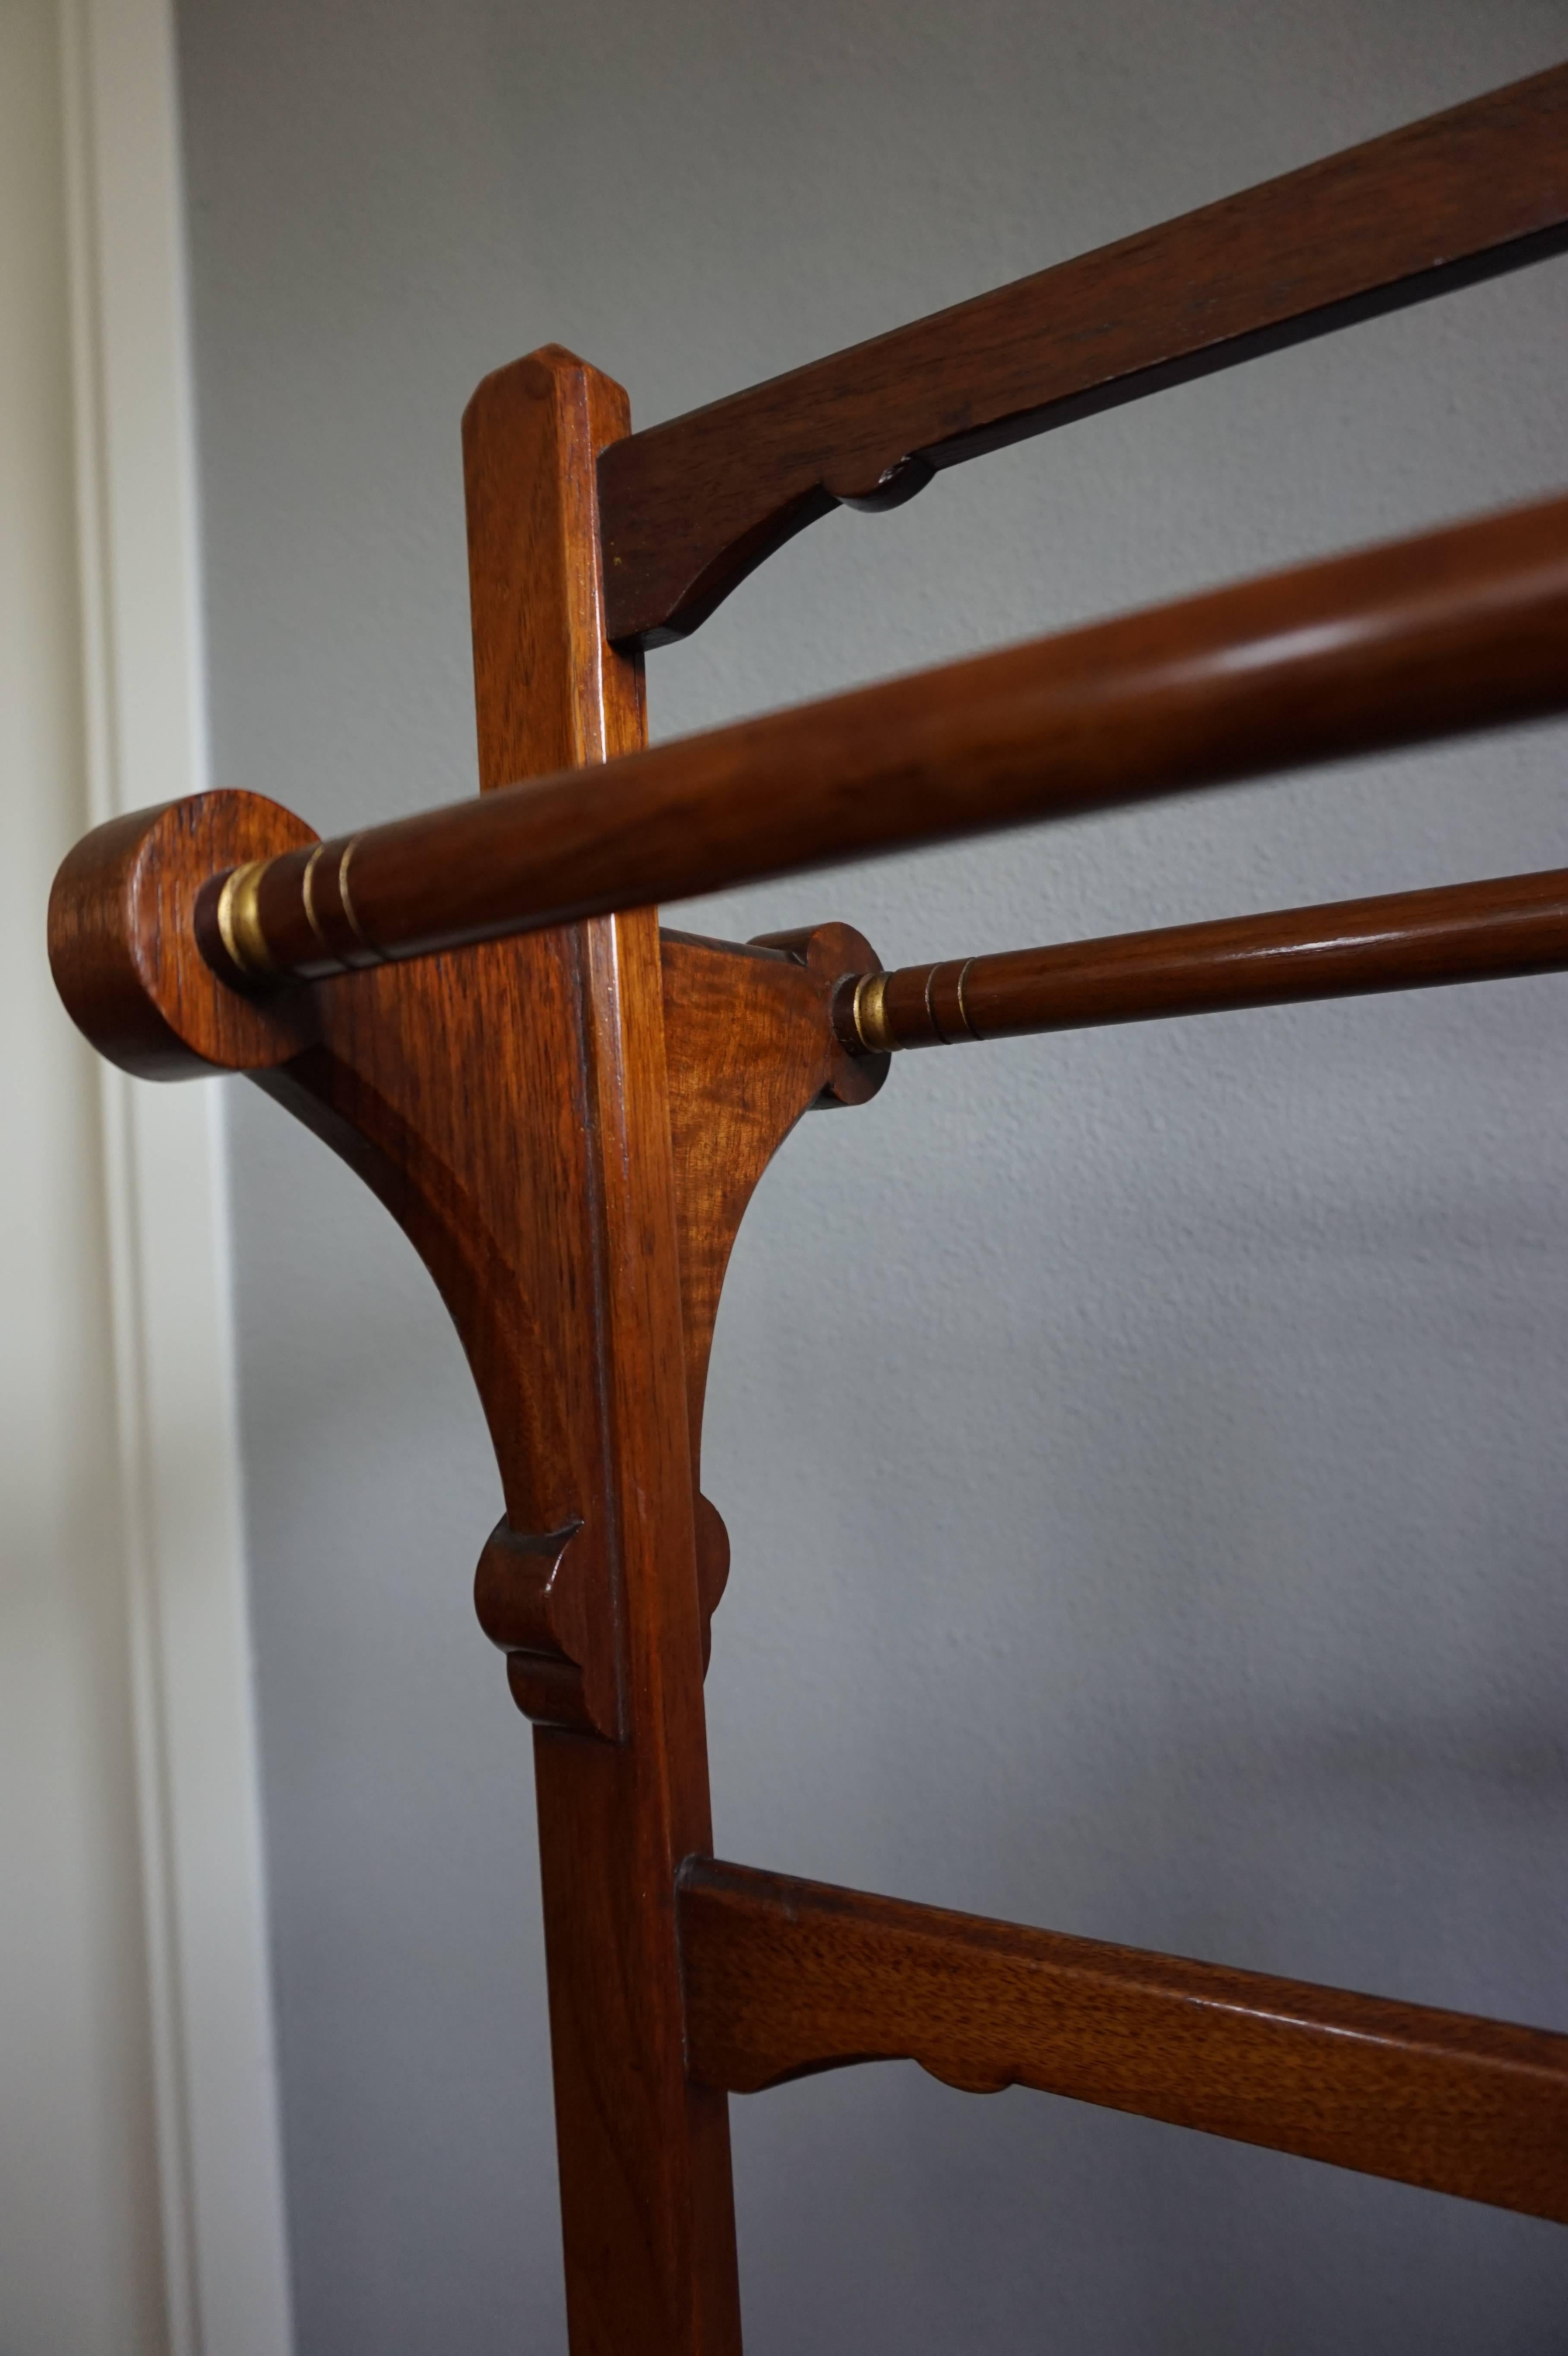 19th Century Arts & Crafts Walnut Towel Rack by Gillow & Co Attributed to Bruce James Talbert